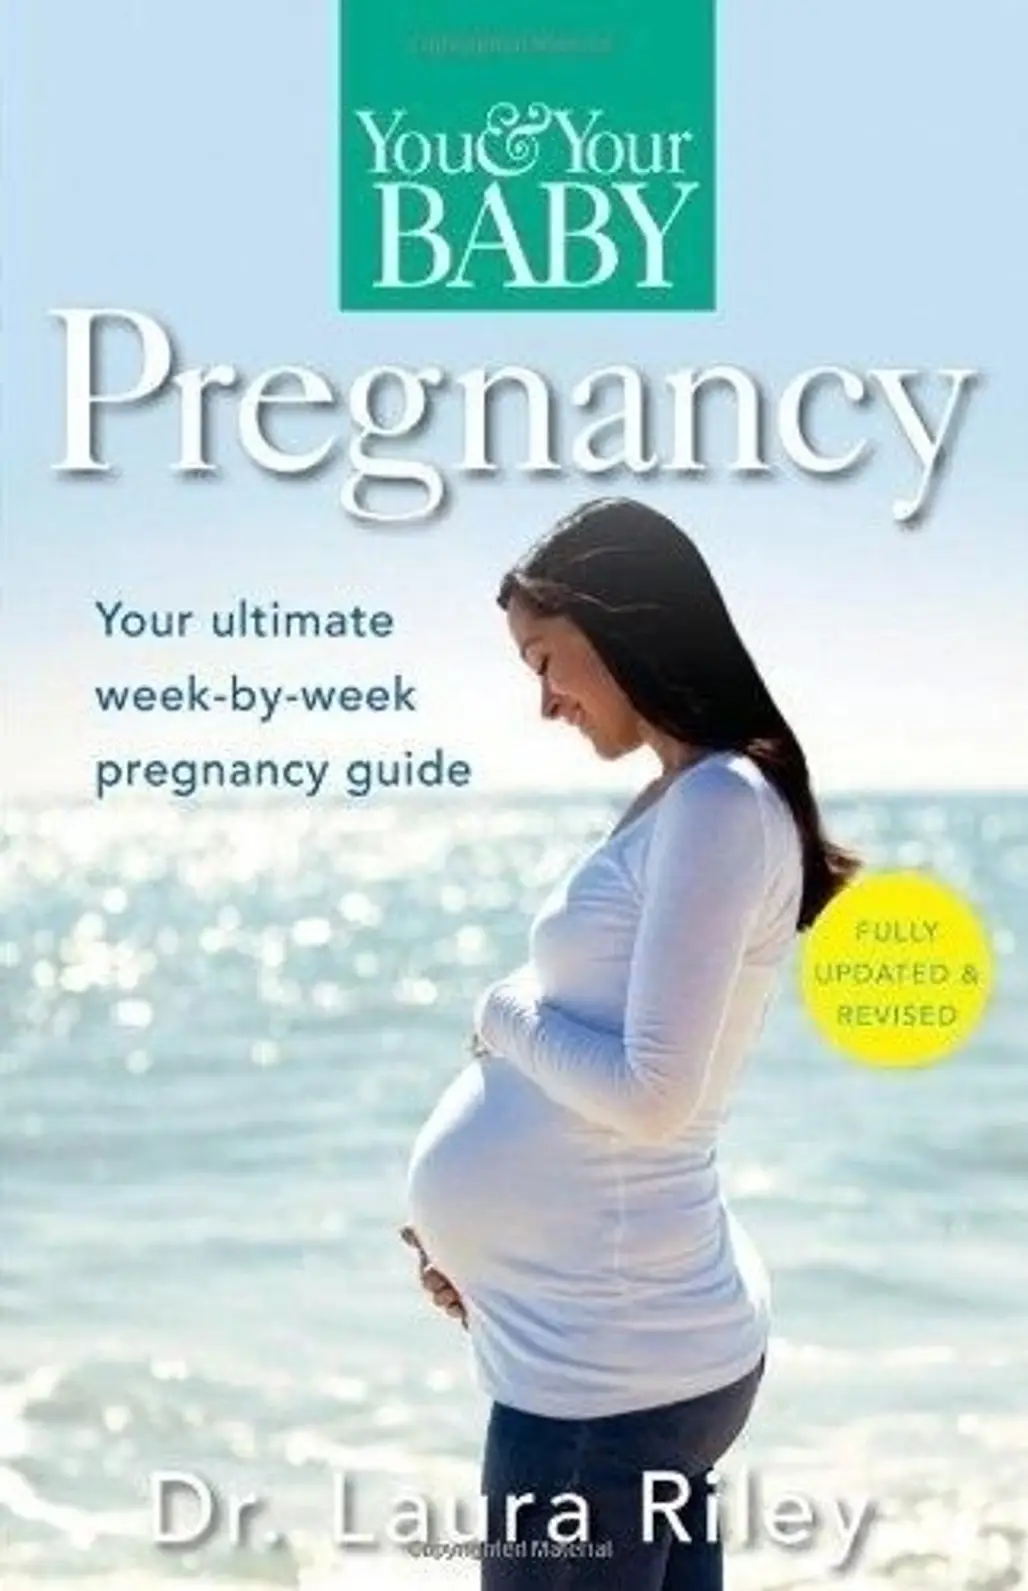 “You and Your Baby: Pregnancy”